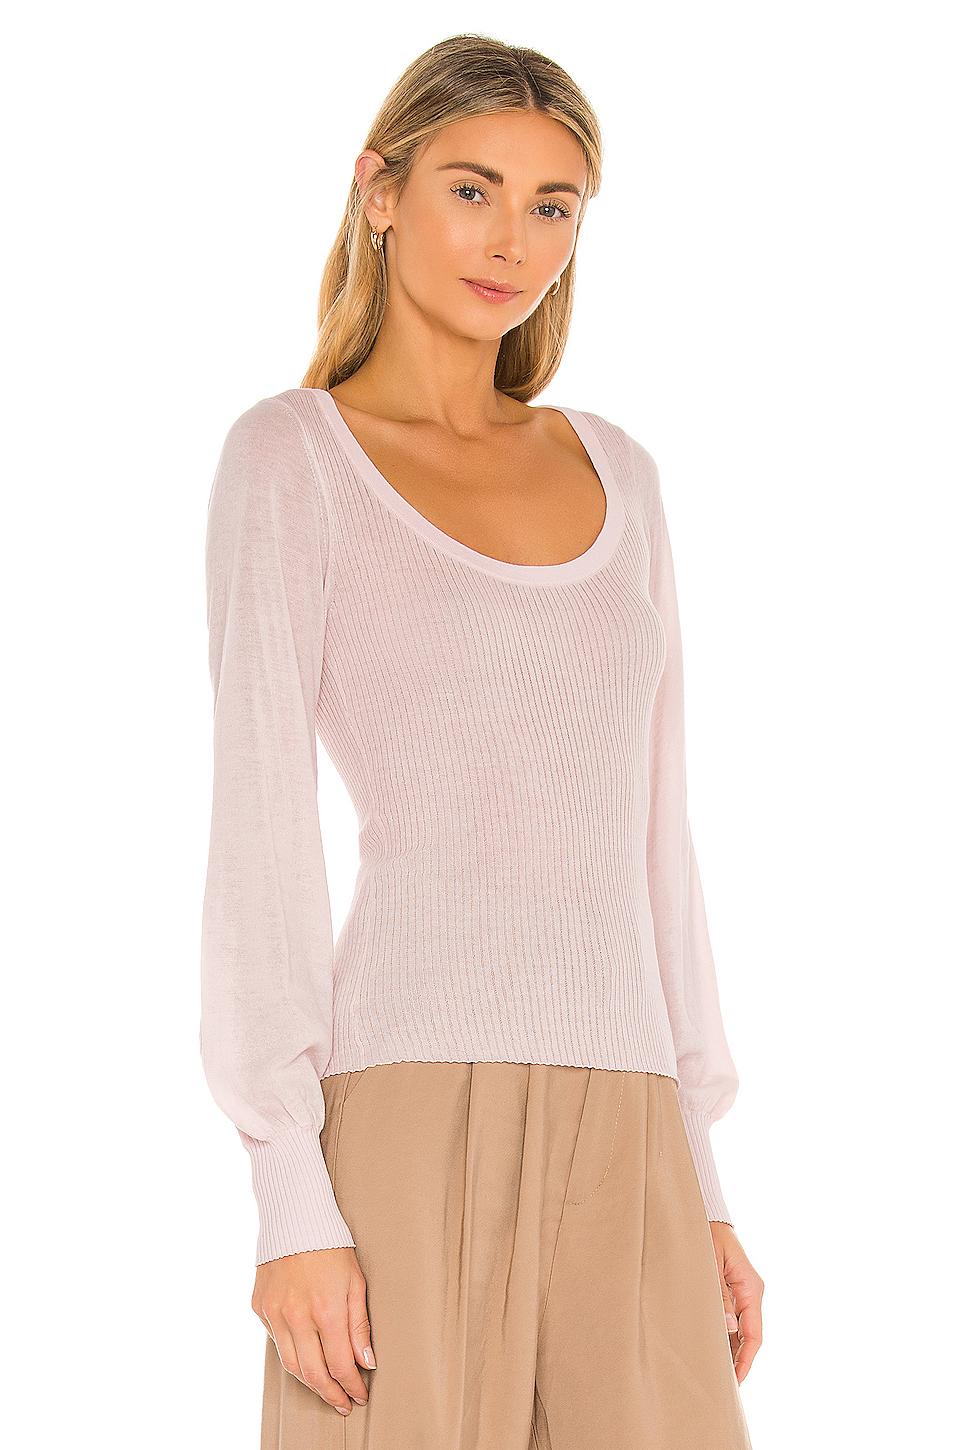 Autumn Cashmere Cashmere Rib Scoop With Sheer Bishop Sleeves Top in ...